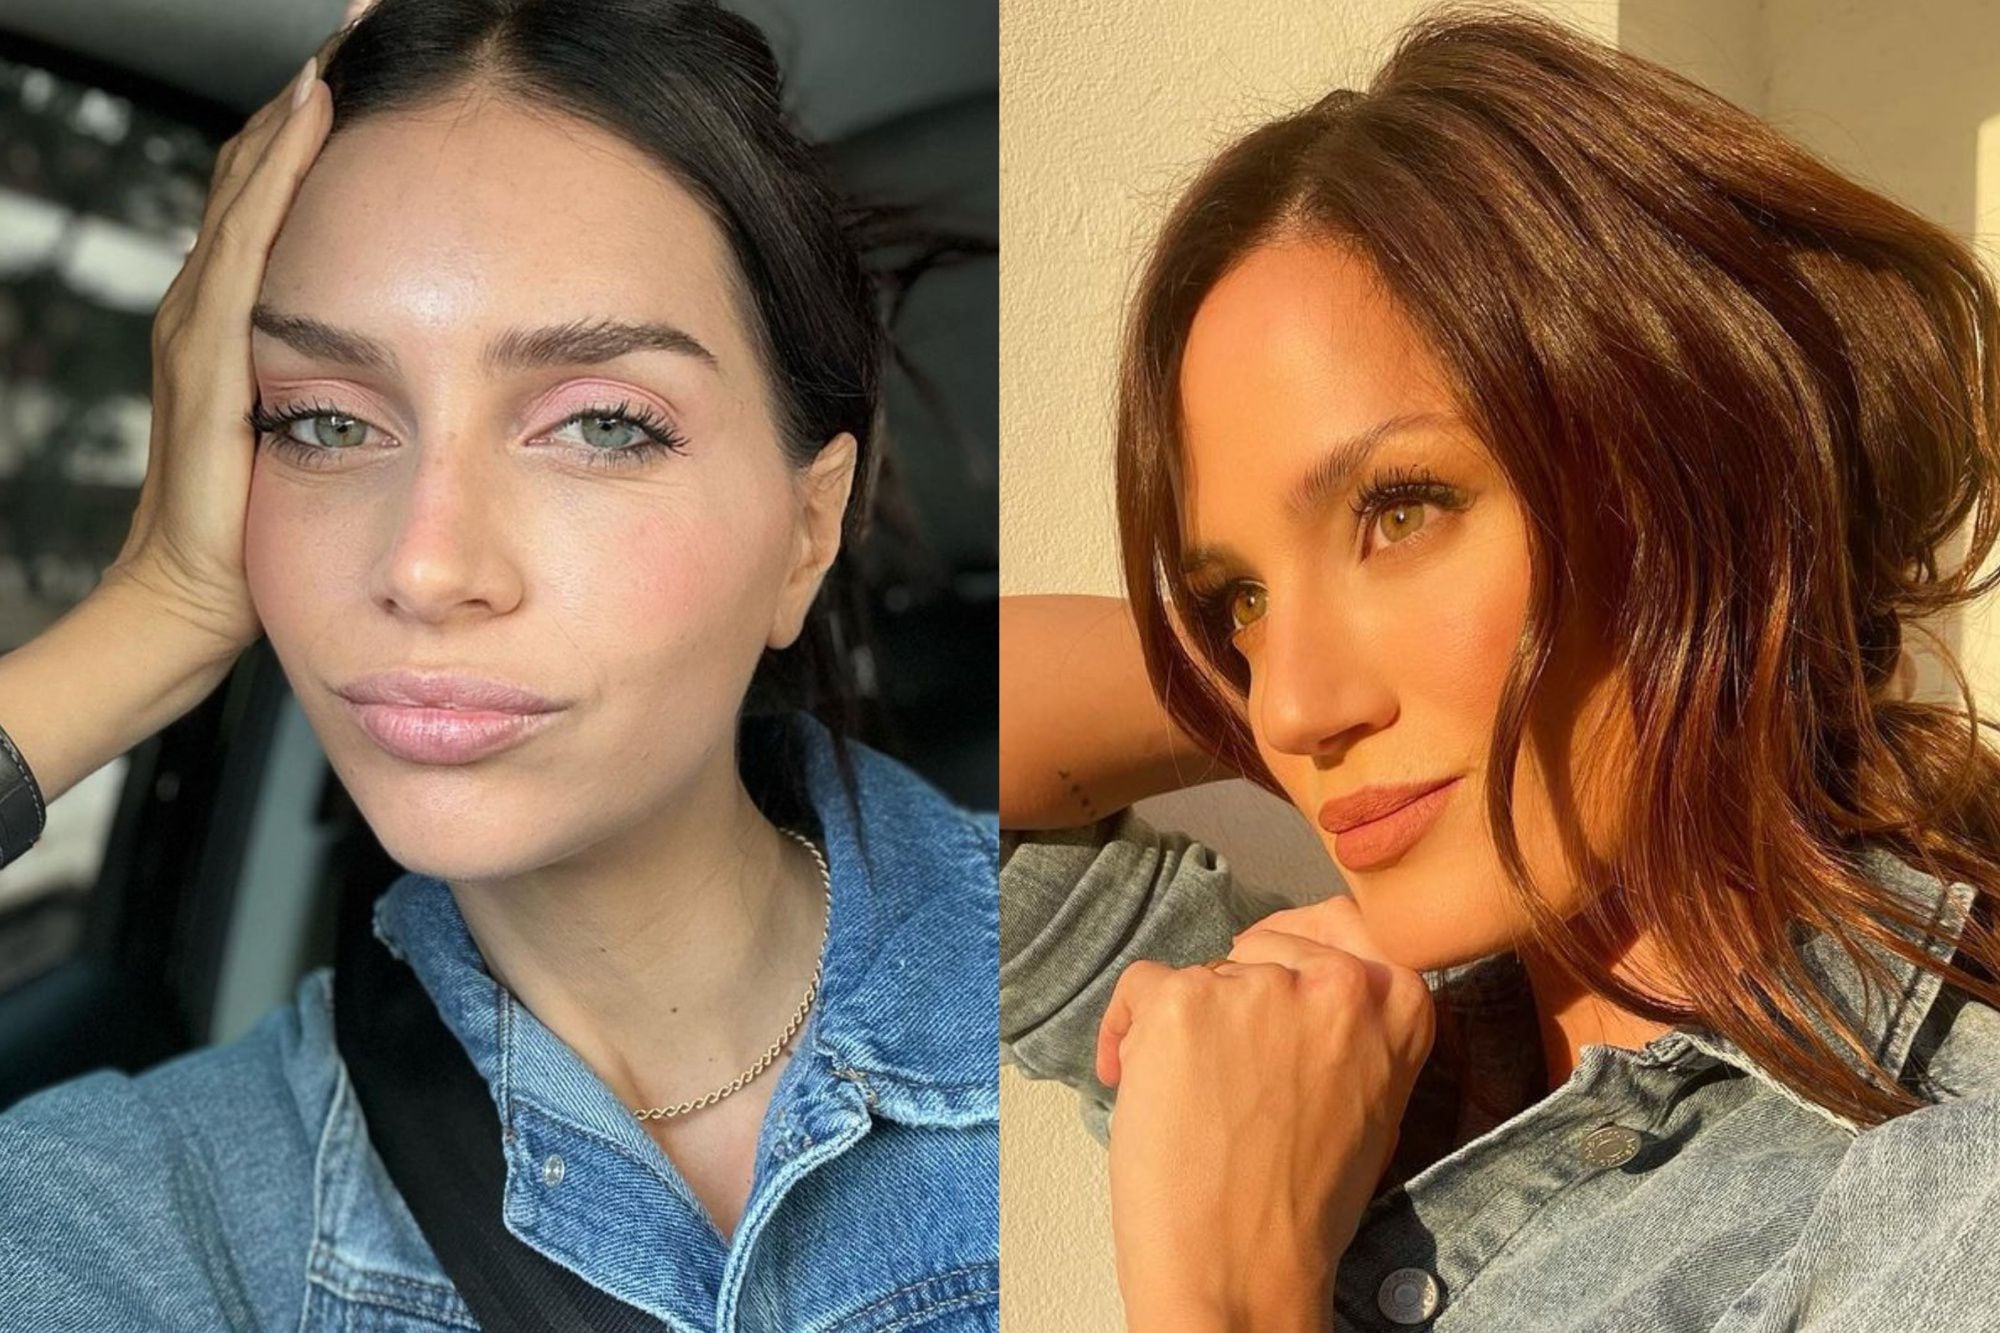 Paula Chaves spoke of her relationship with Zaira Nara and was blunt: “It anguishes me, I don't want to talk”